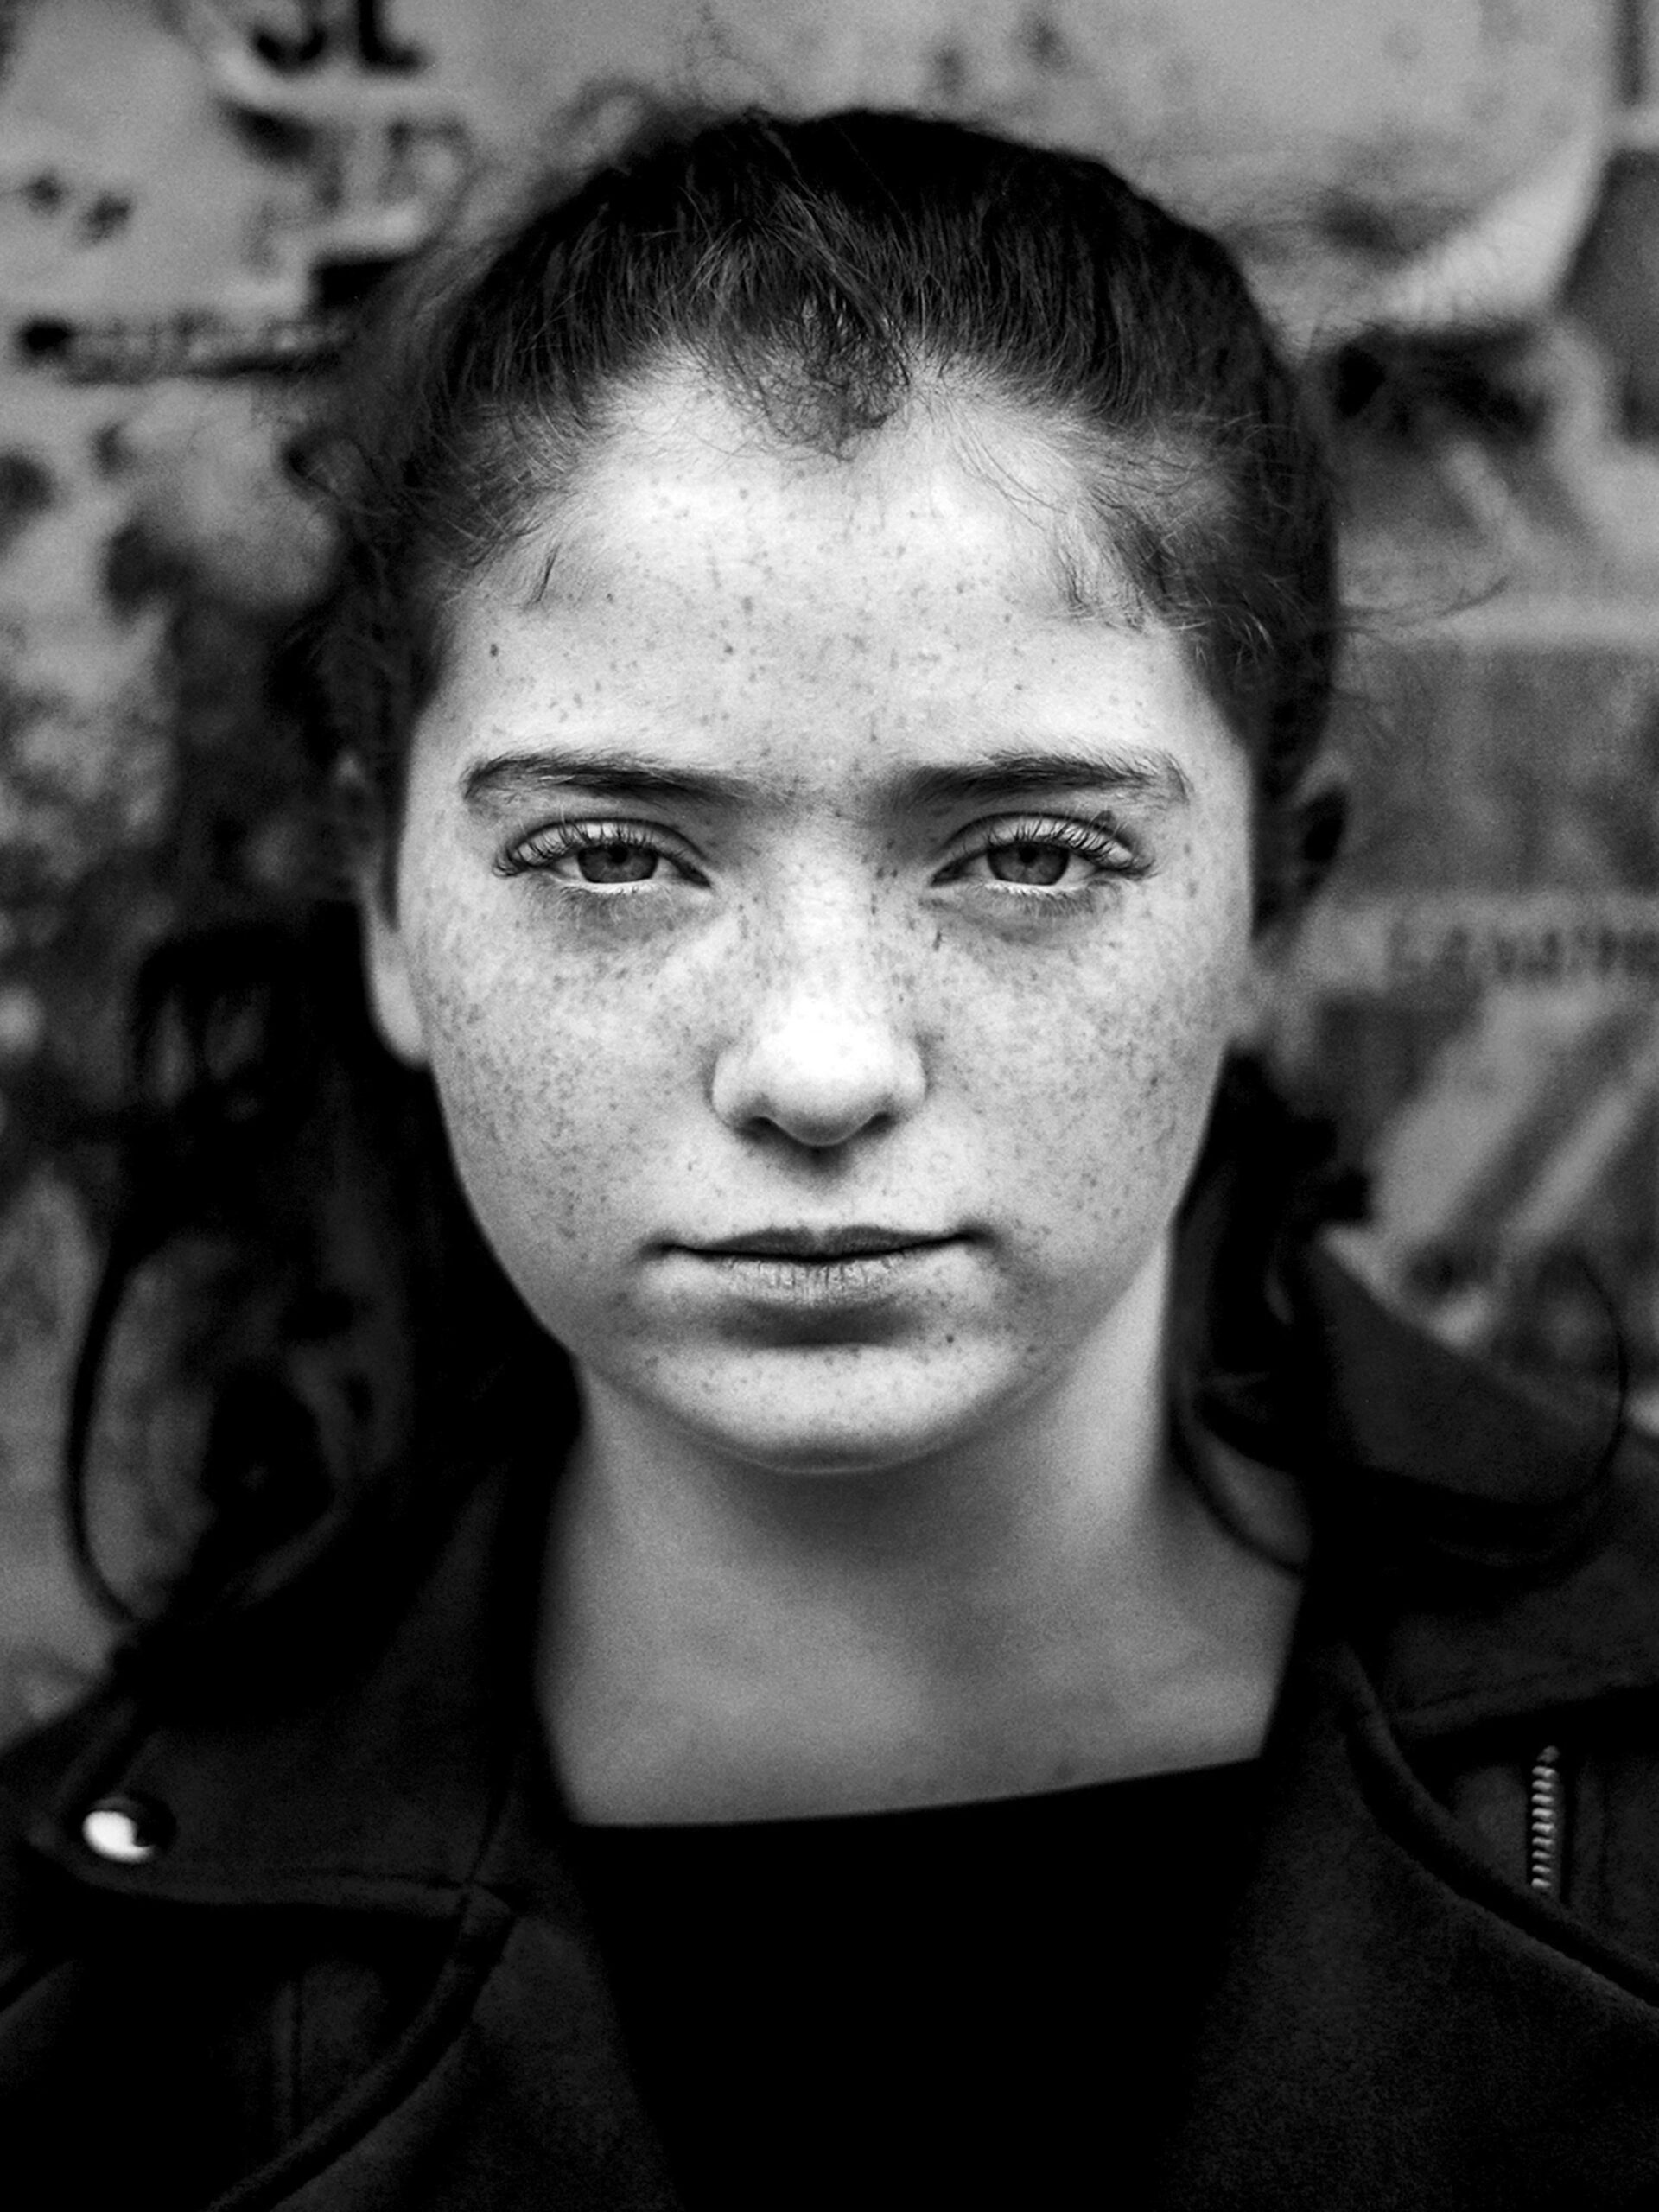 Katie, from the series 'Wee Muckers'